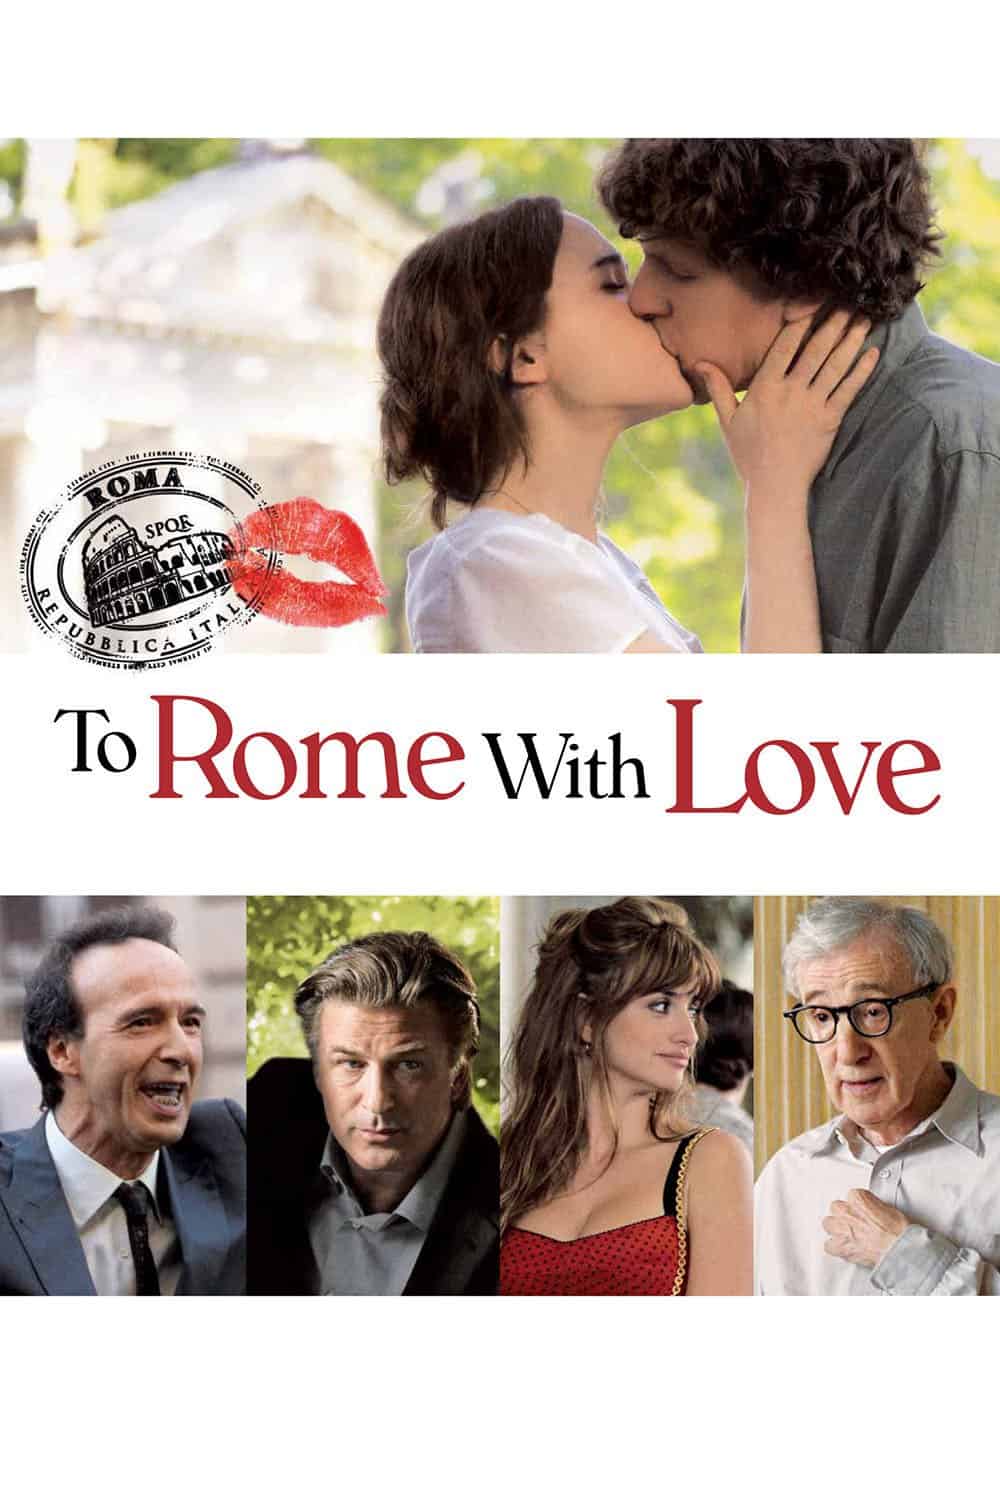 To Rome with Love, 2012 